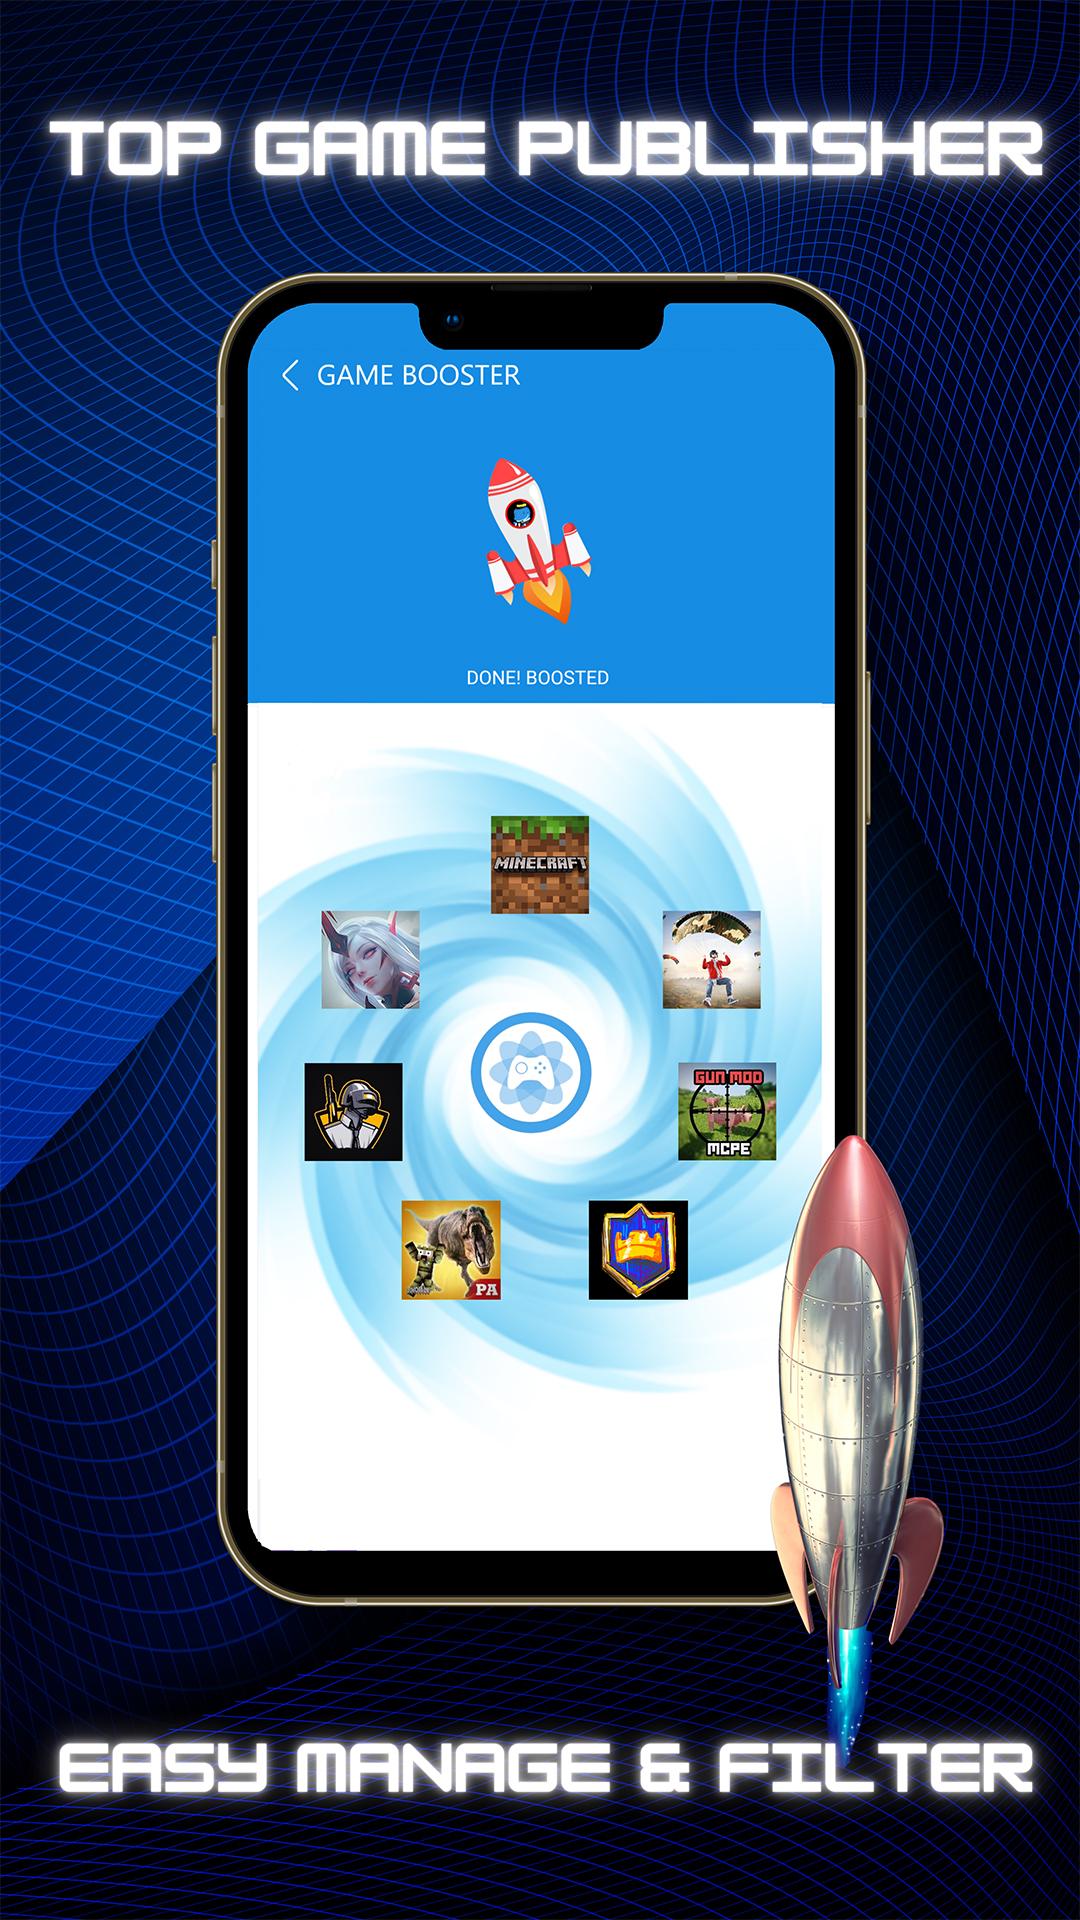 Launch game. Samsung game Launcher APK. Game booster launcher